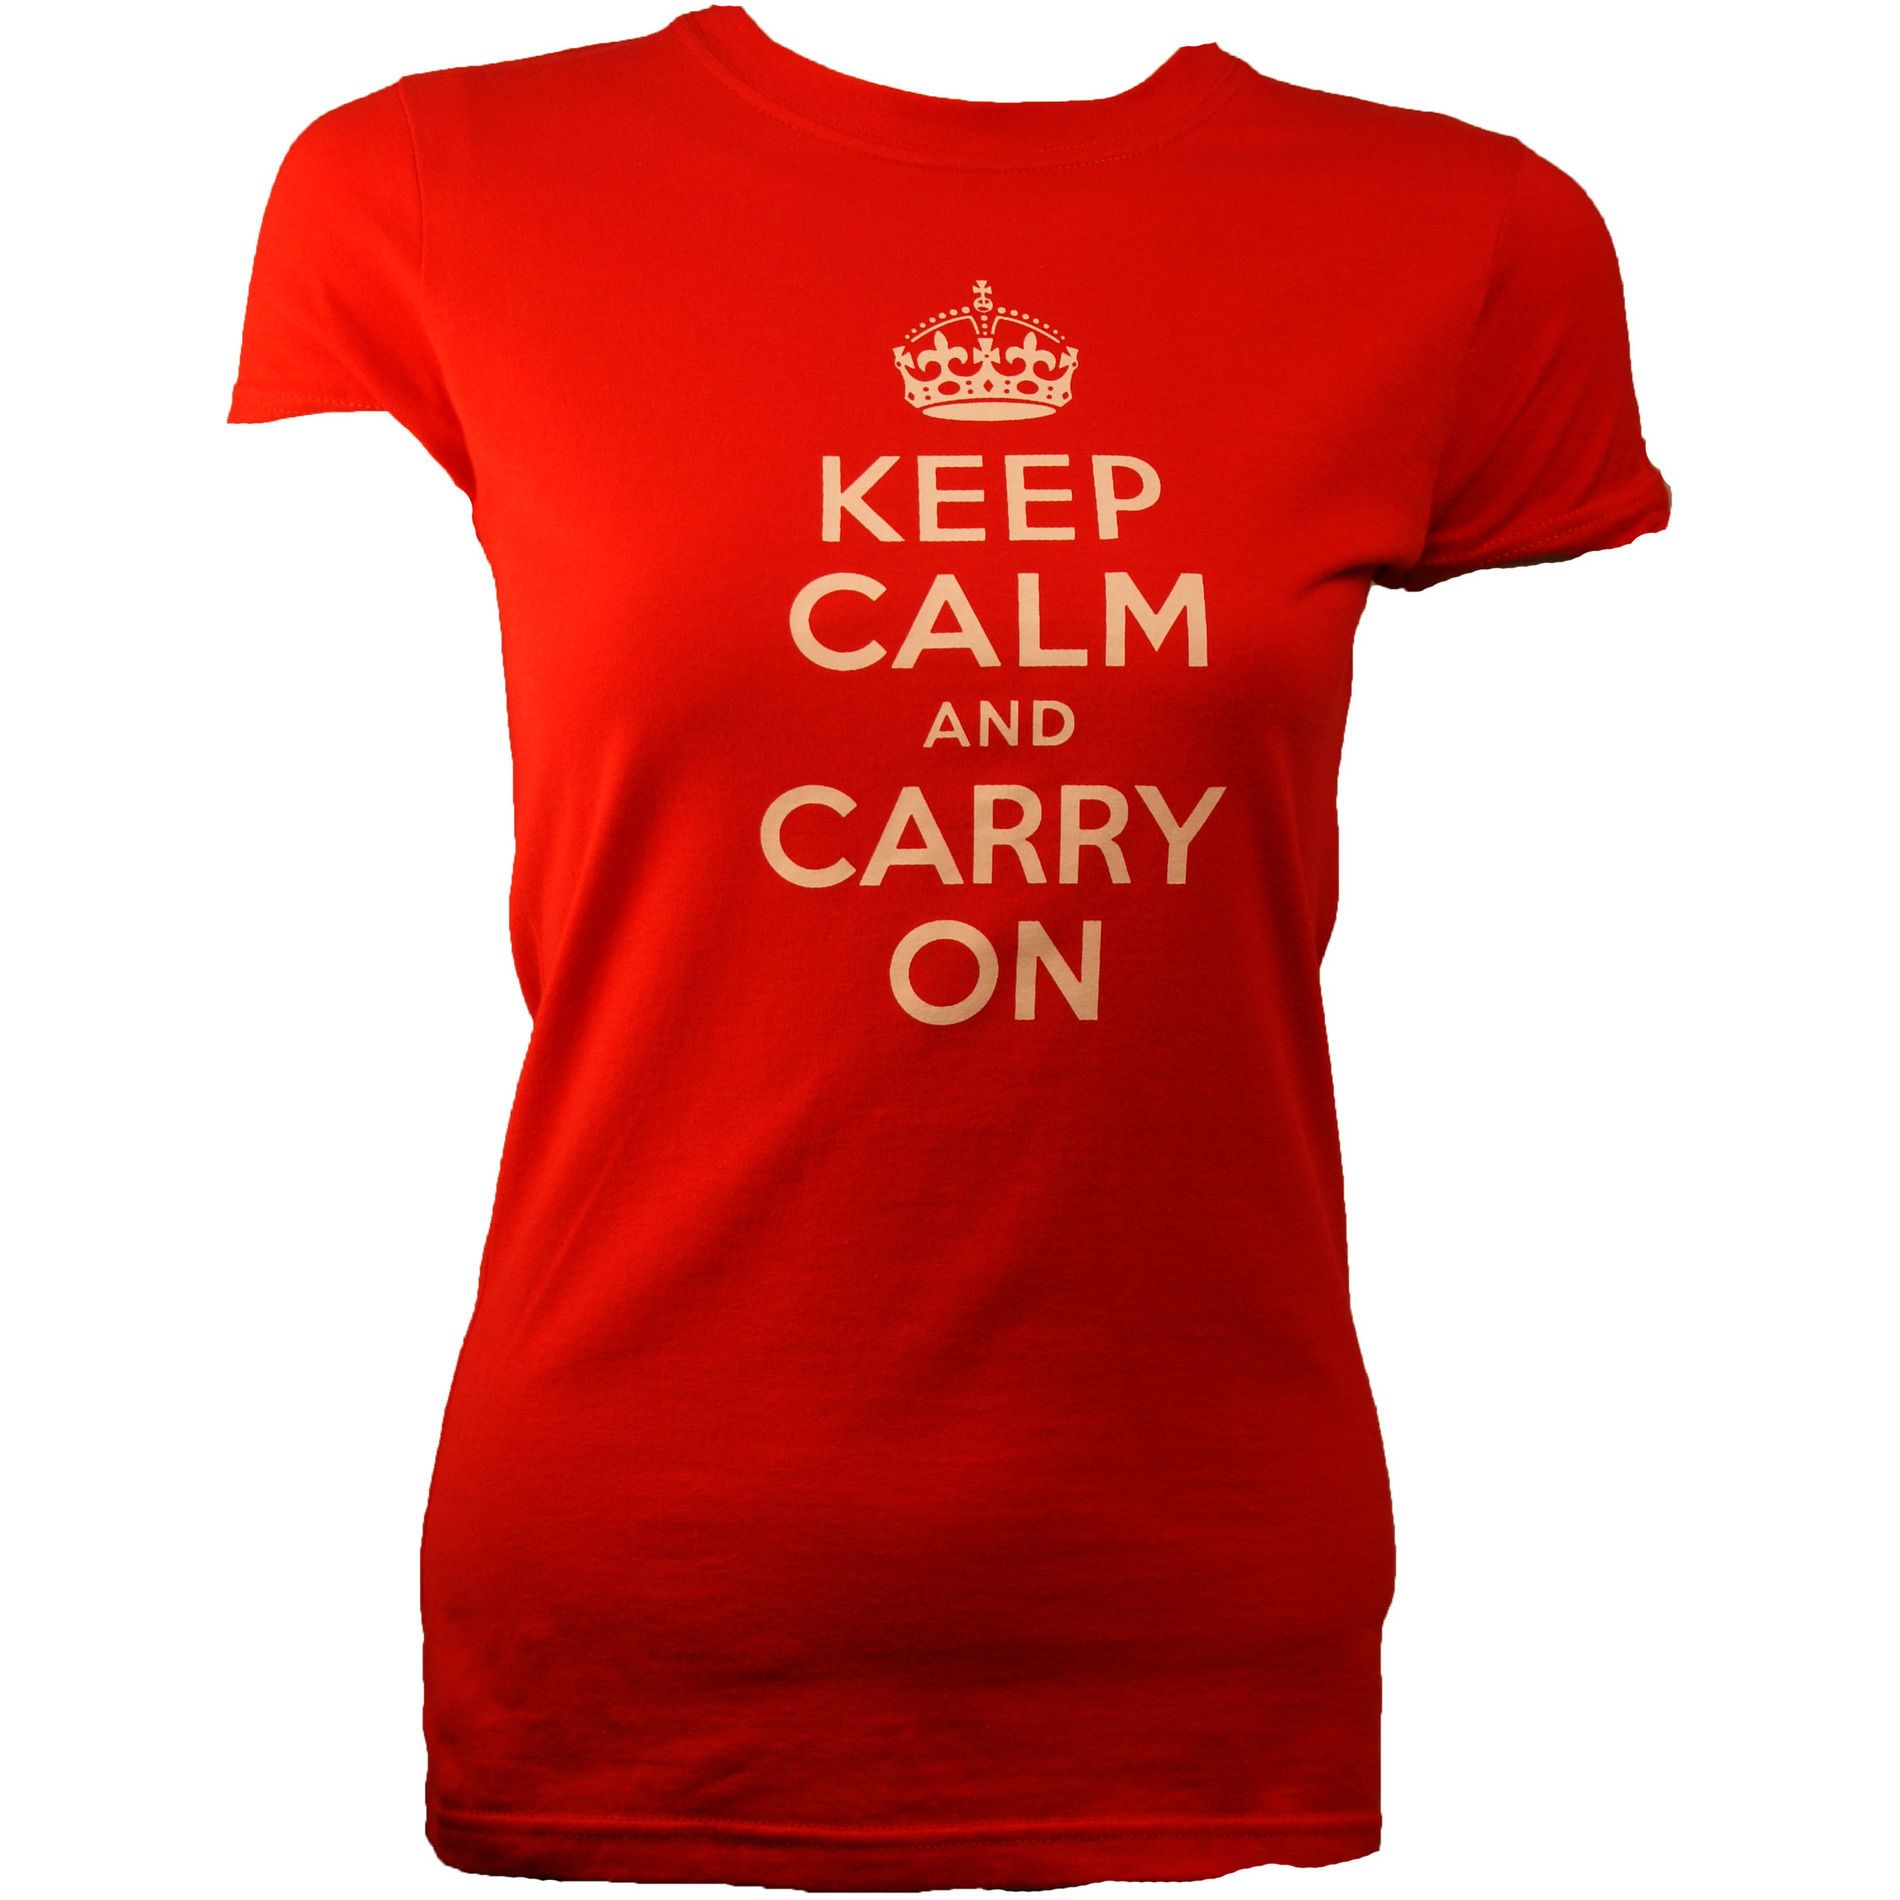  Keep Calm And Carry On Shirt Uncanny!